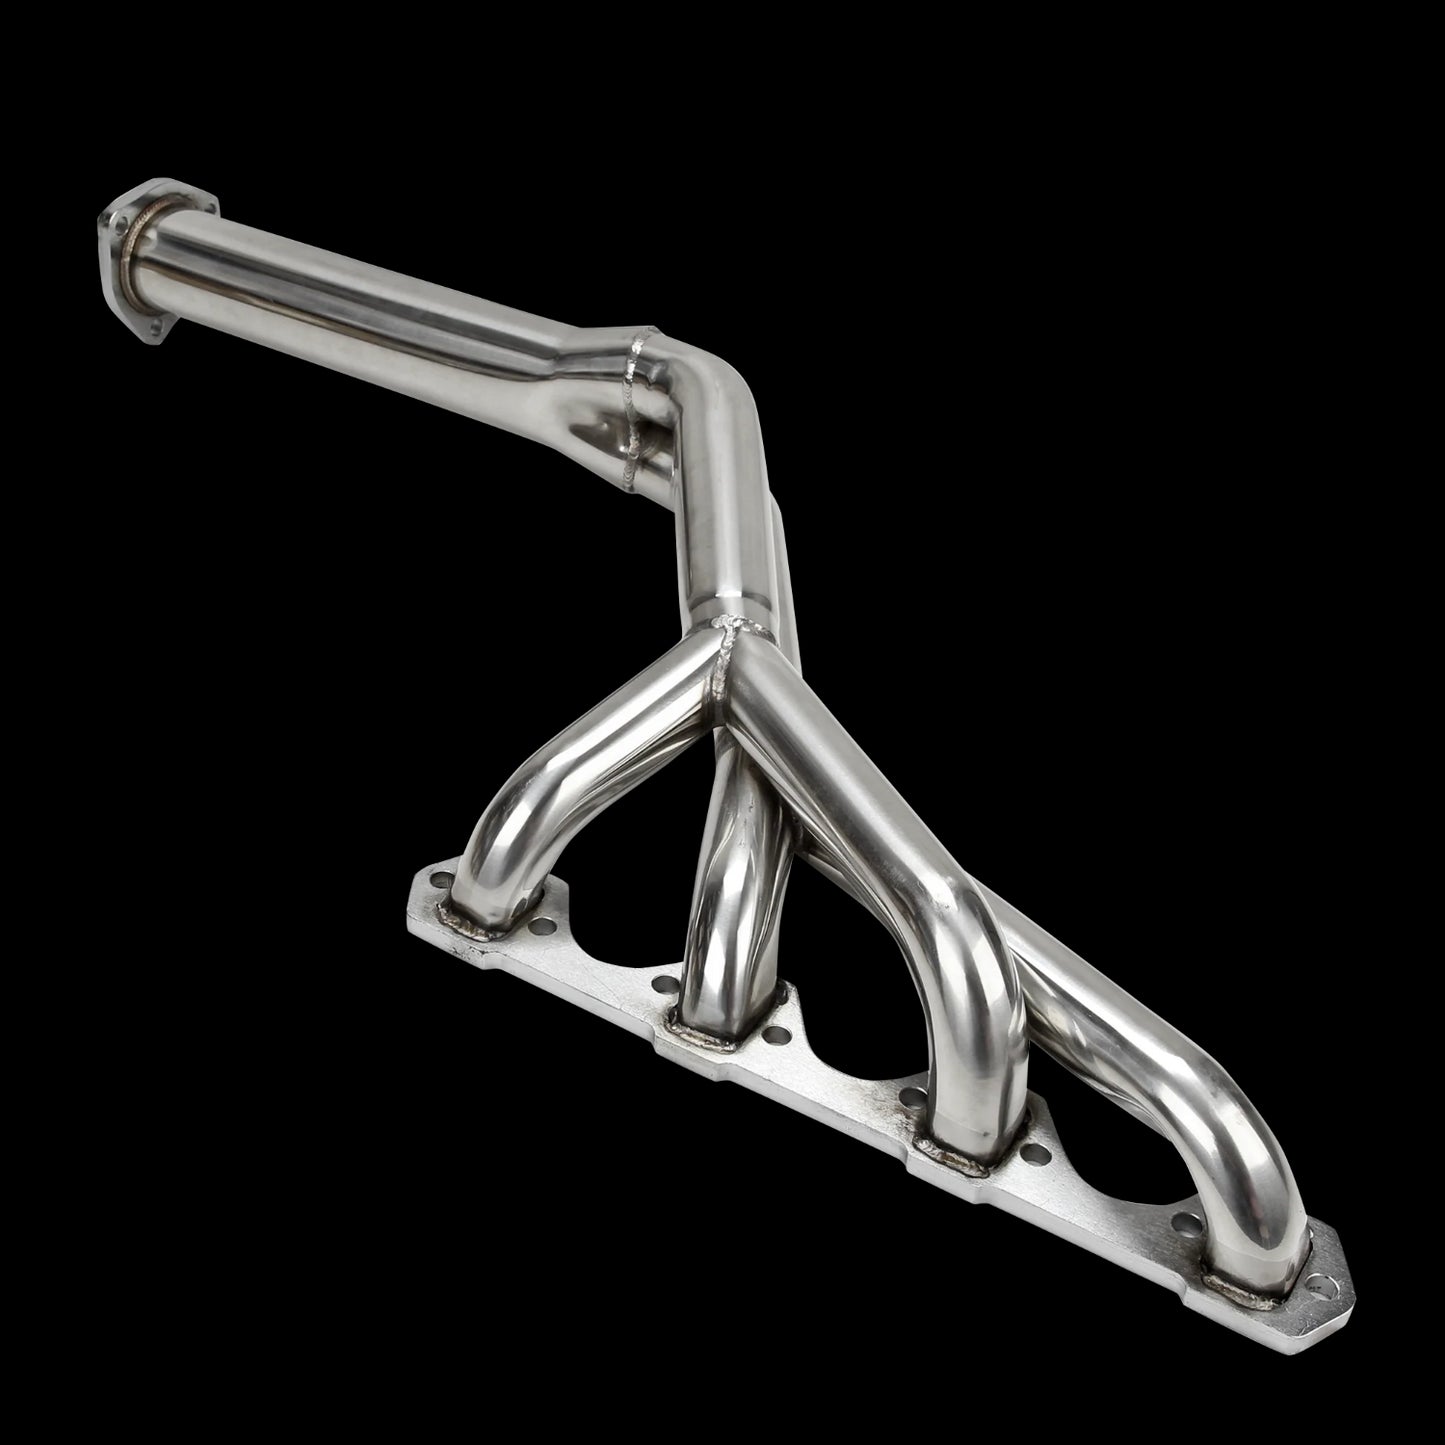 Tri-Y Stainless Exhaust Manifold Headers for Ford Mercury, Mustang, Cougar, 260, 289, 302,